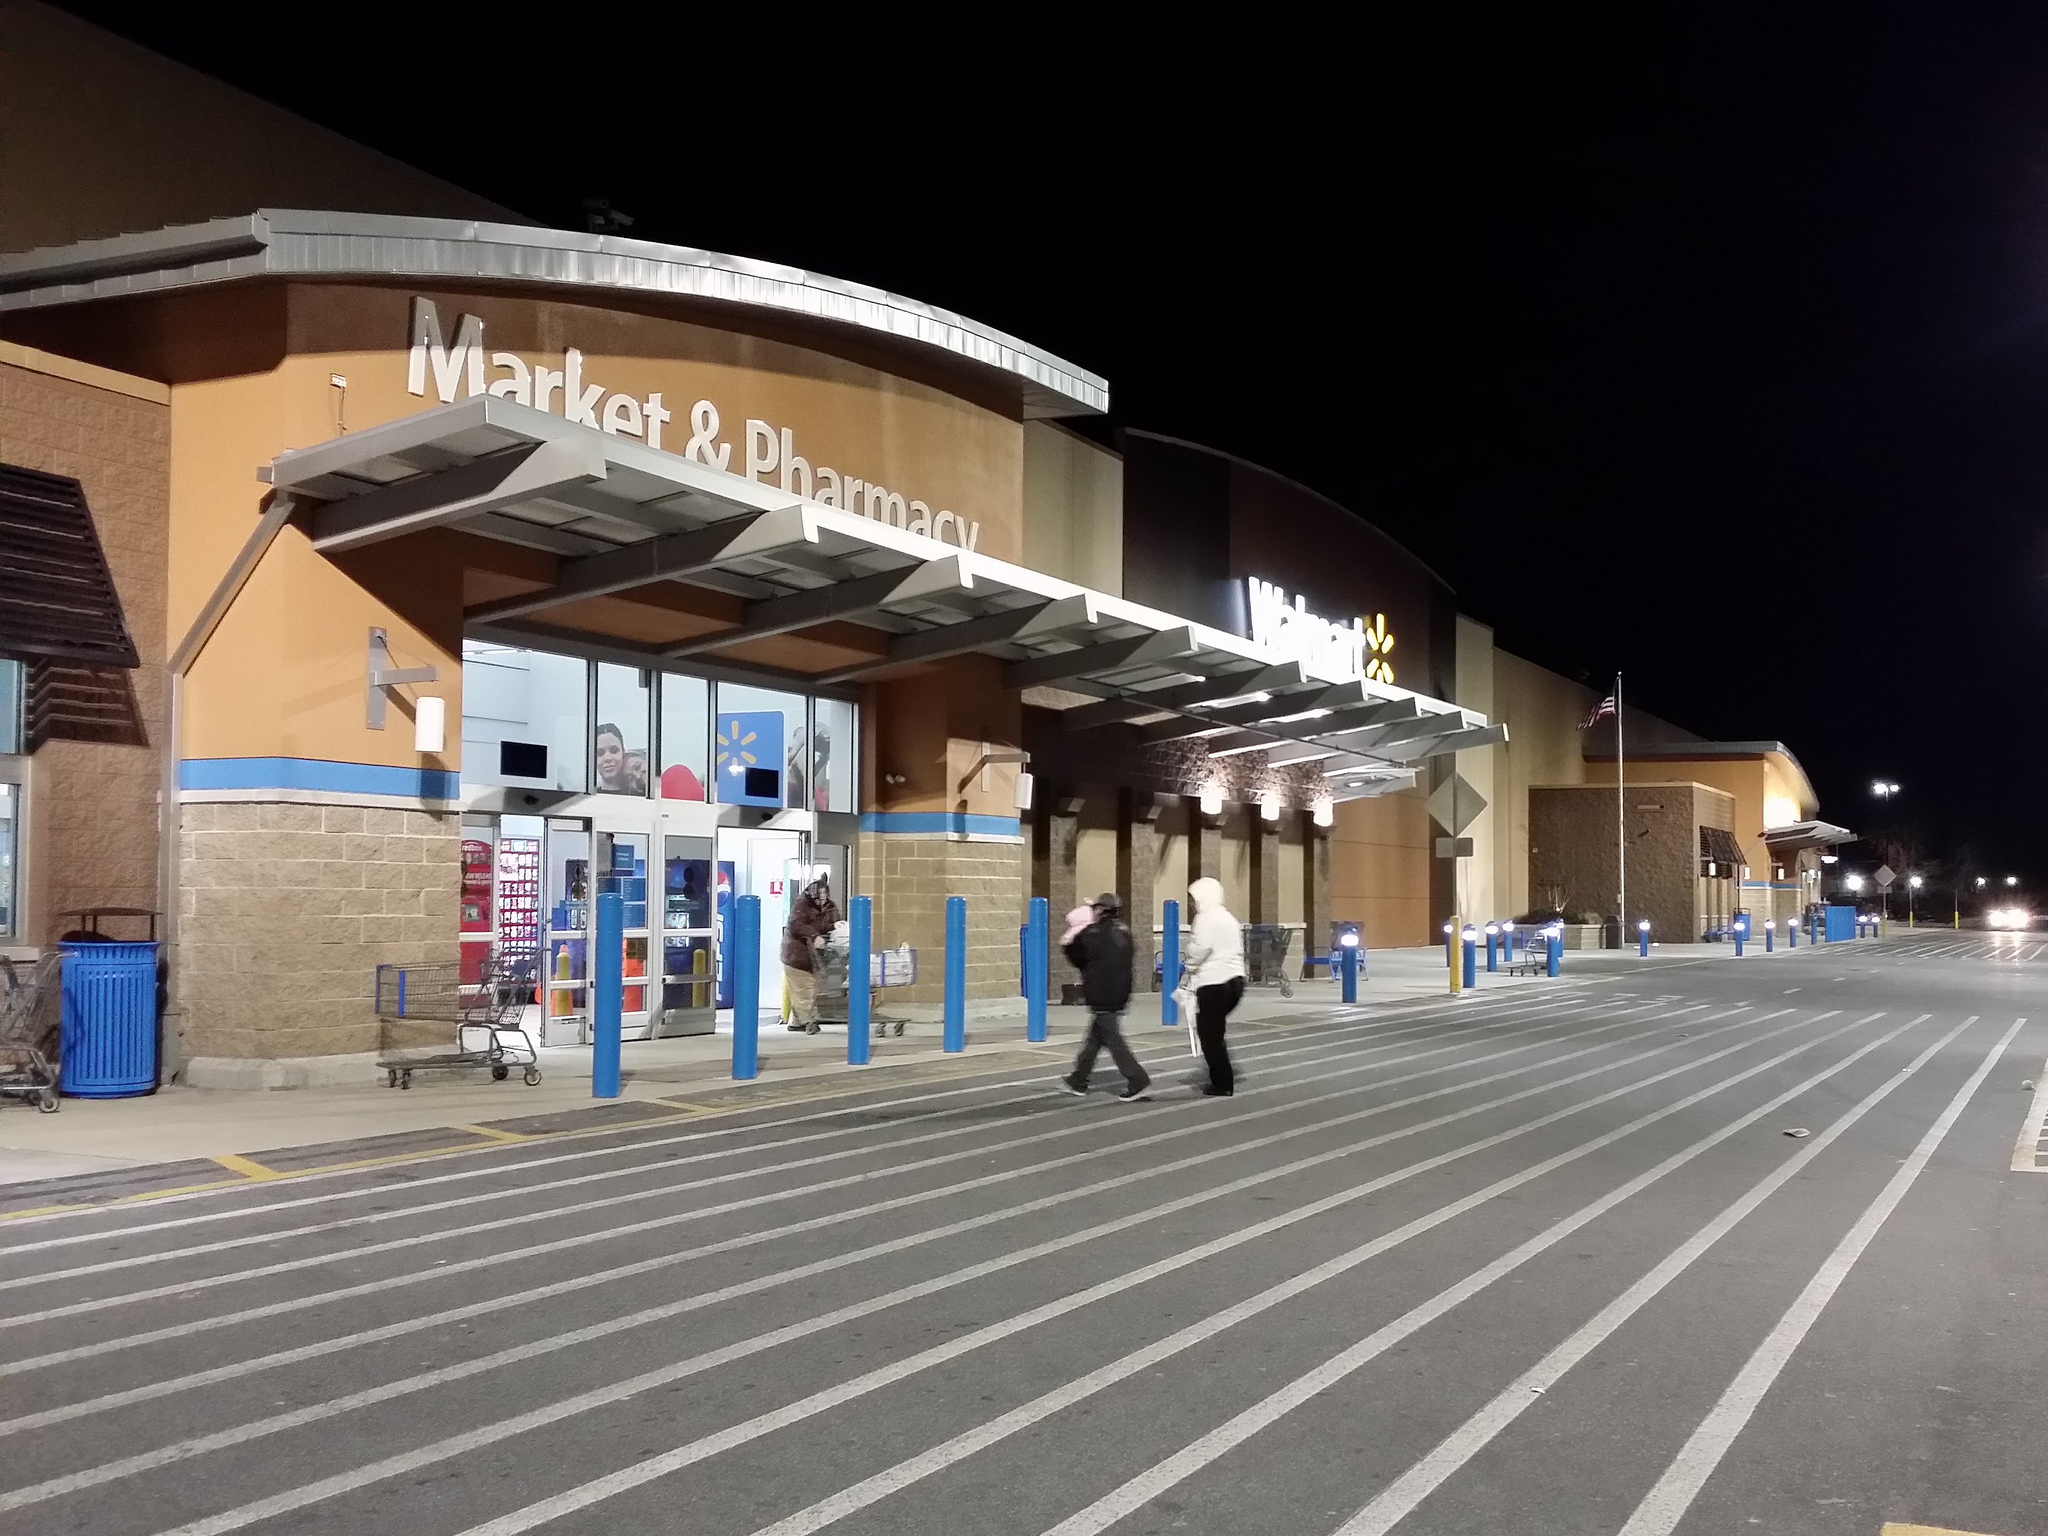 Walmart Ending Overnight Shopping Hours At More 24-Hour Stores – Consumerist